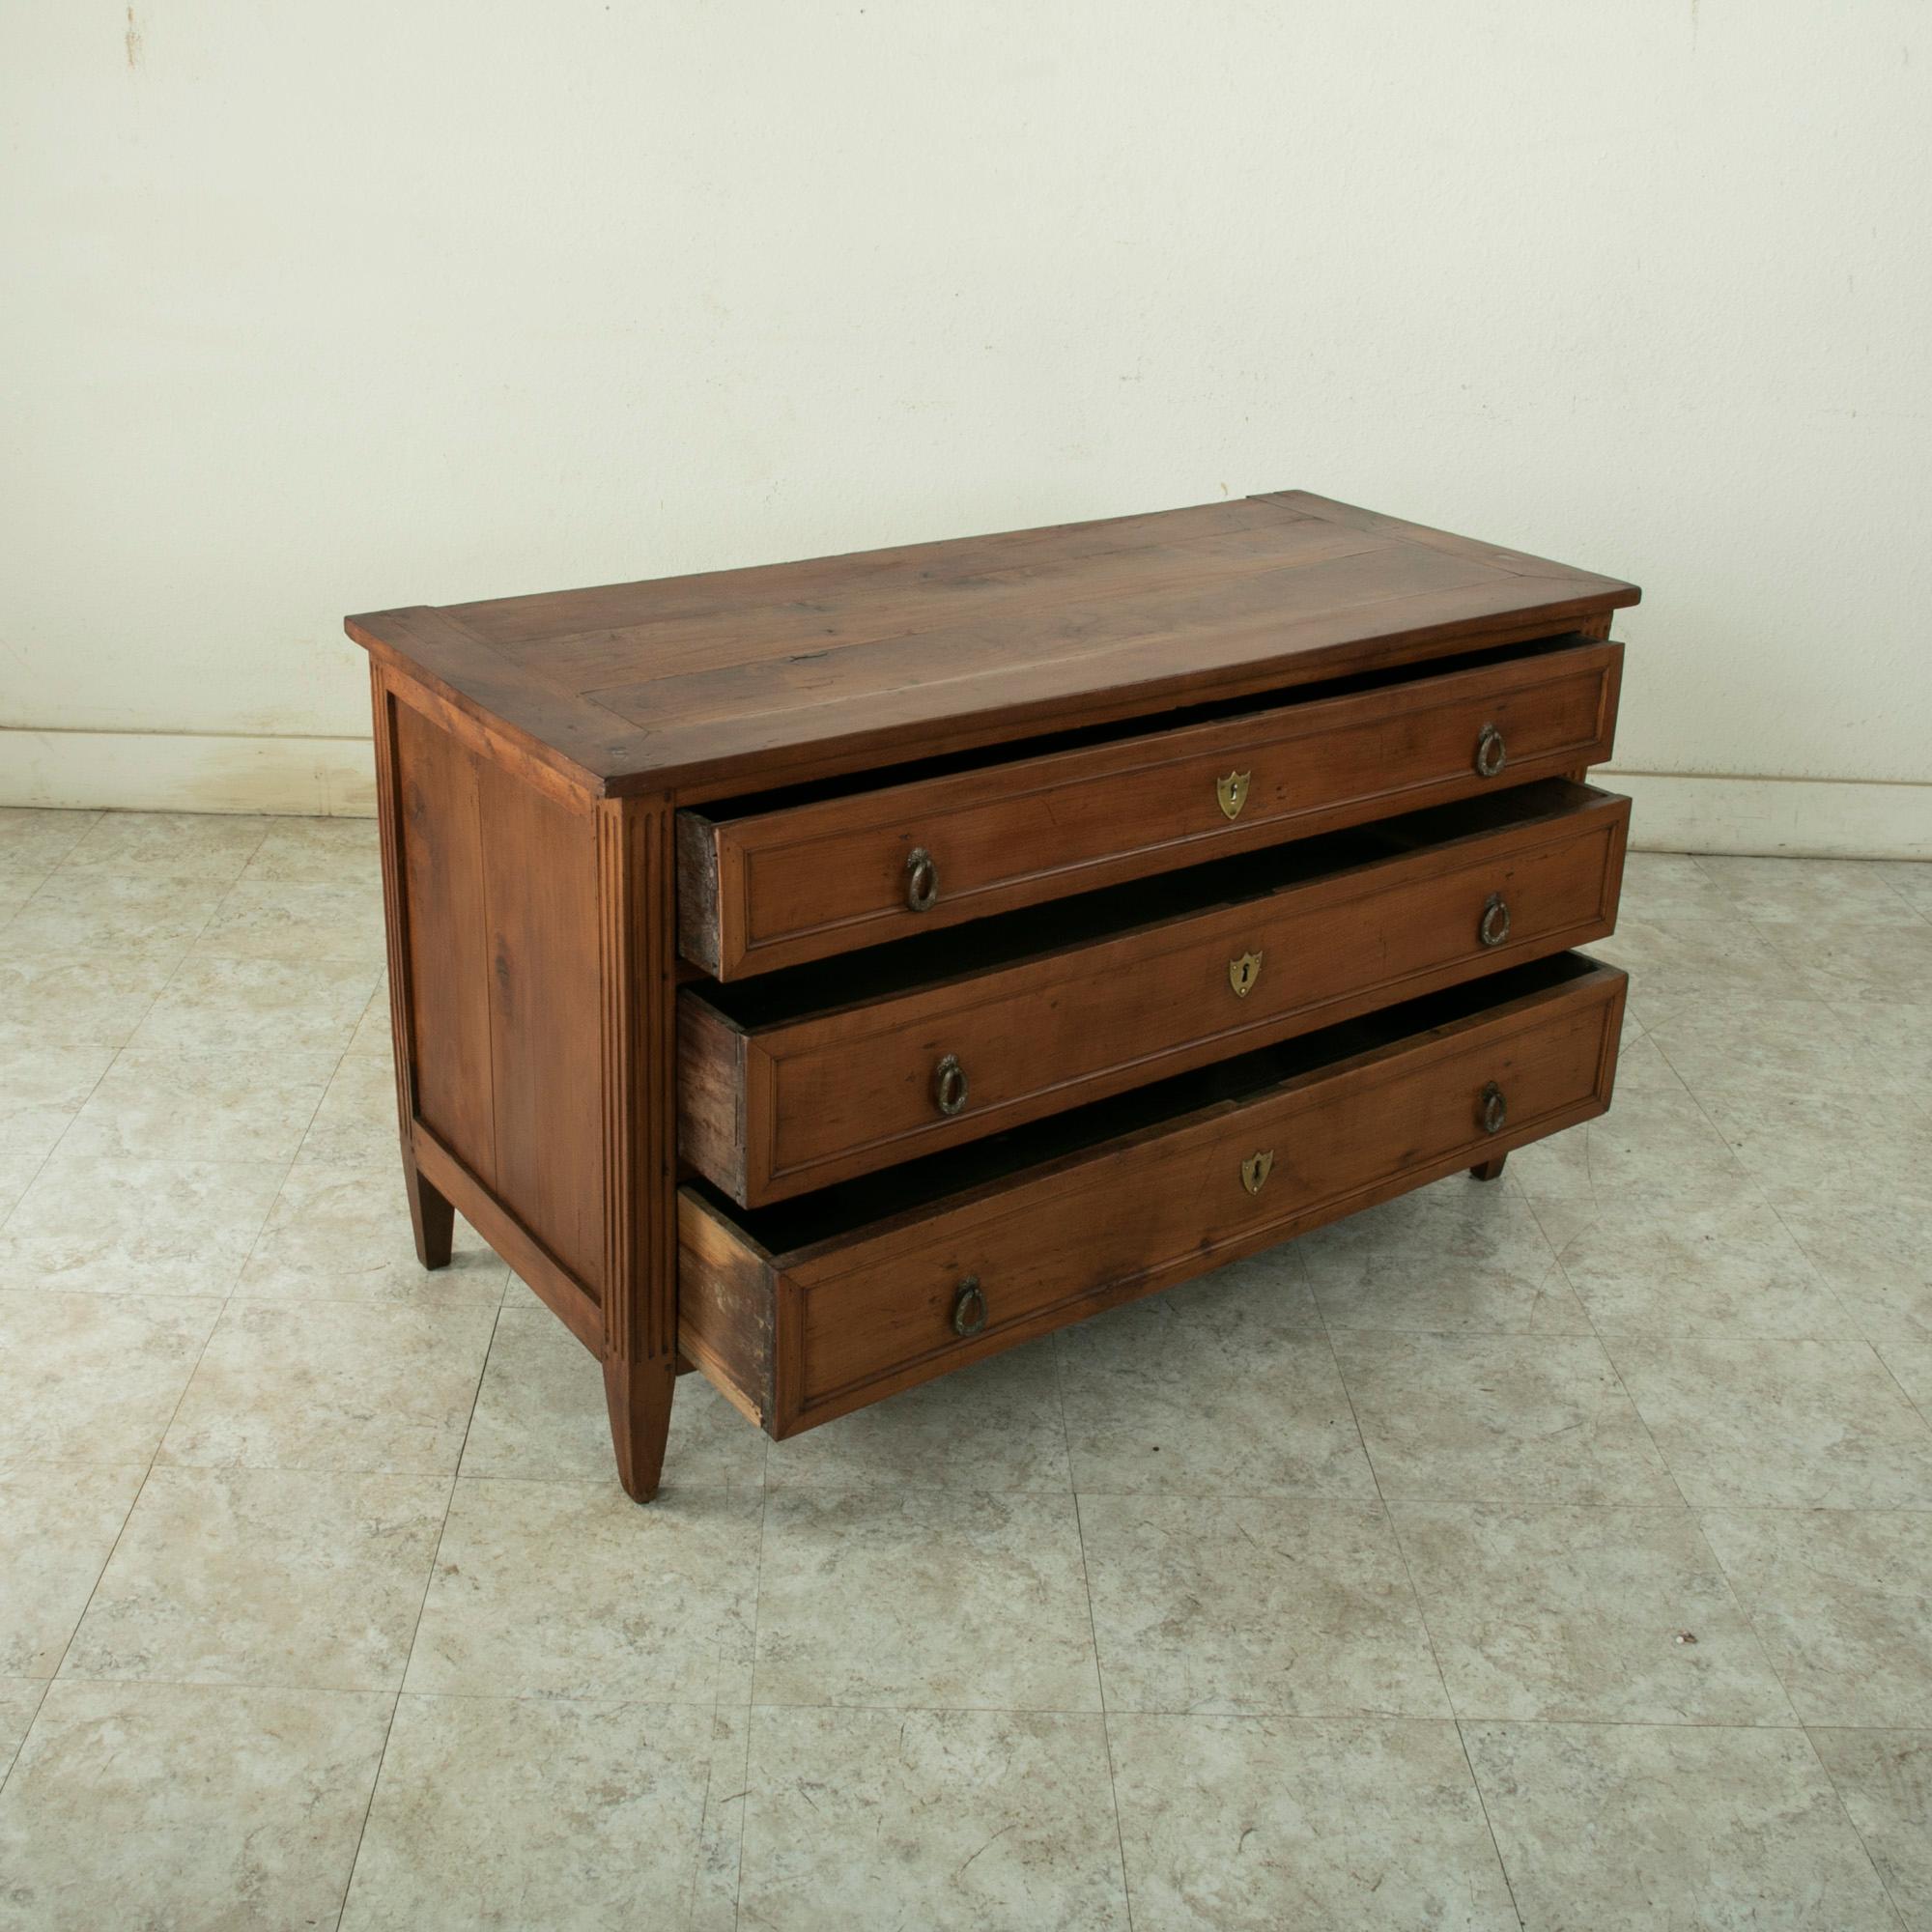 Late 18th Century French Louis XVI Period Cherry Wood Commode, Chest of Drawers 7